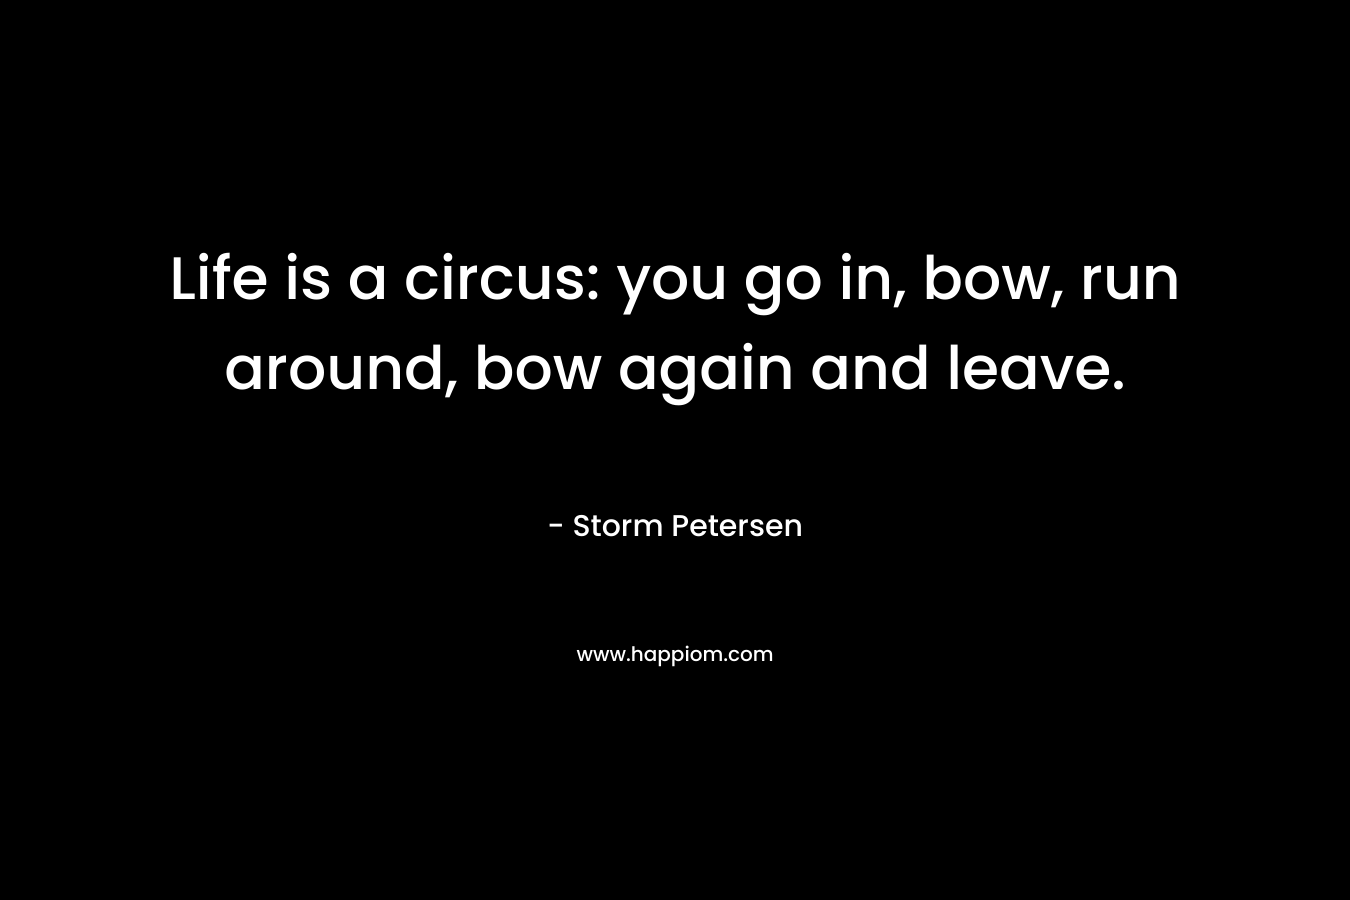 Life is a circus: you go in, bow, run around, bow again and leave.